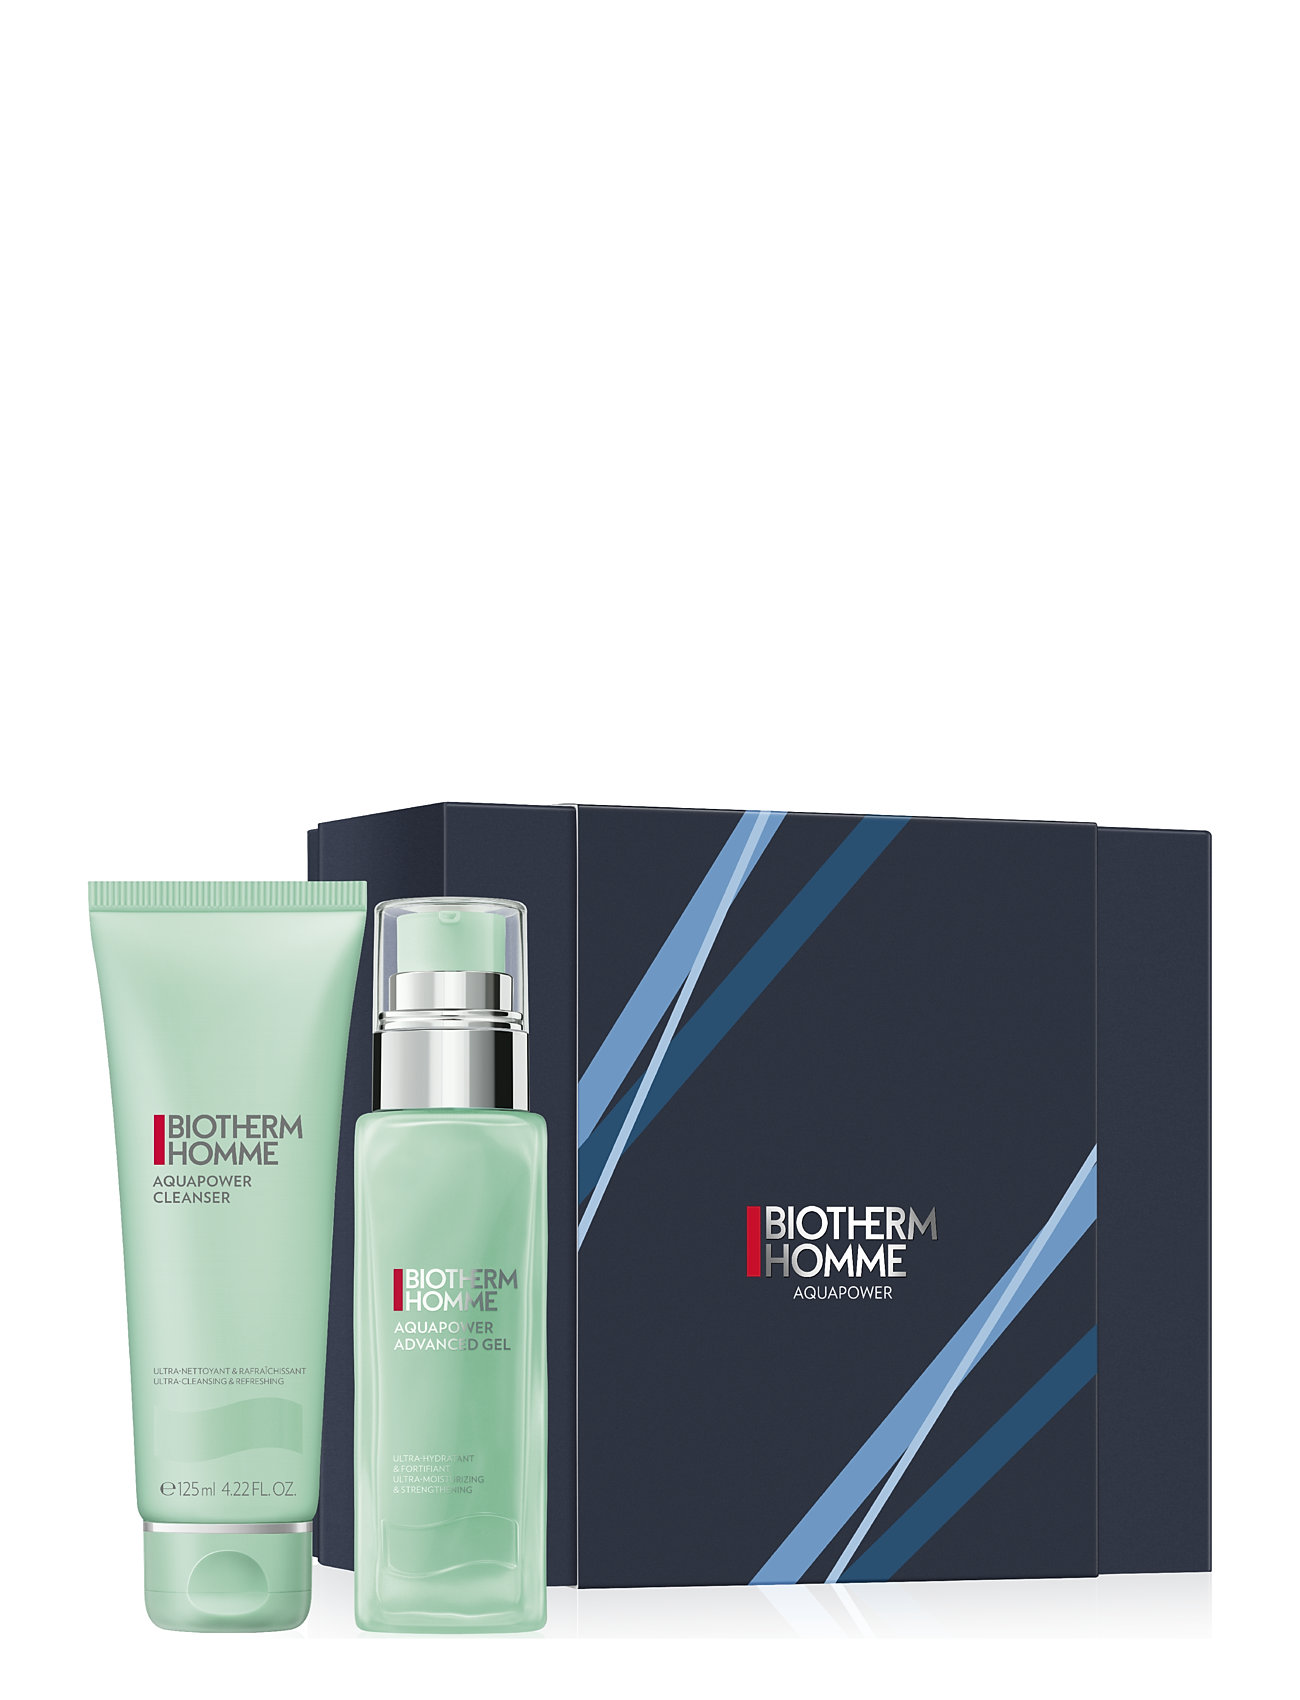 Aquapower Gifting Set 24 Beauty Men All Sets Nude Biotherm